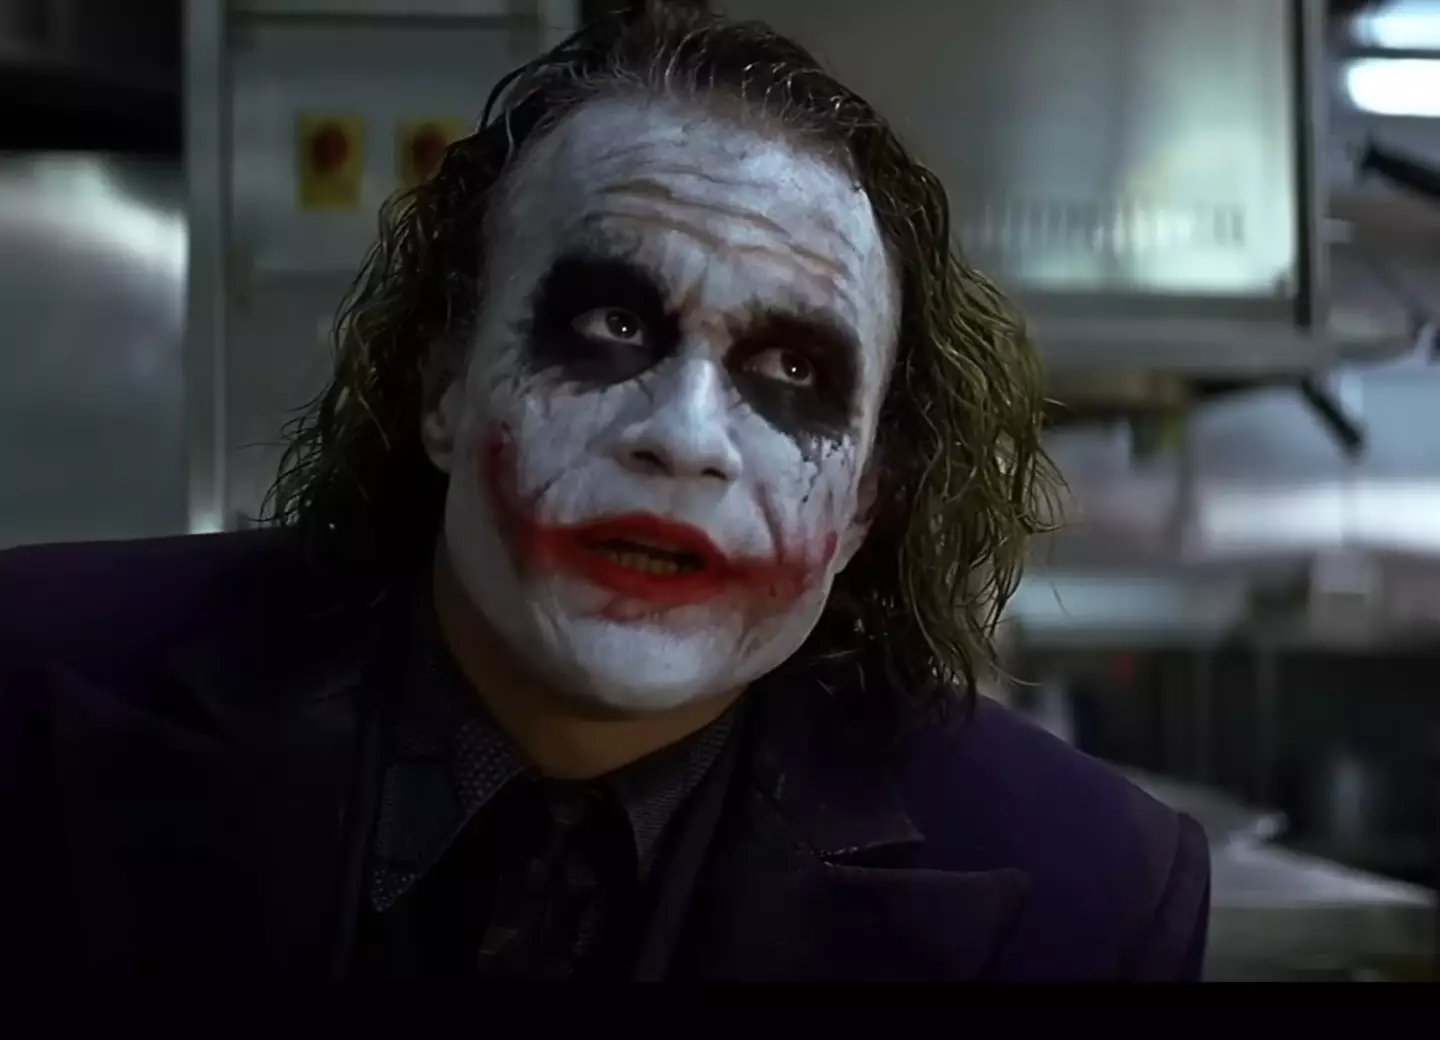 Heath Ledger spent hours getting his makeup done for this scene, even on days of shooting when he wouldn't be on camera.